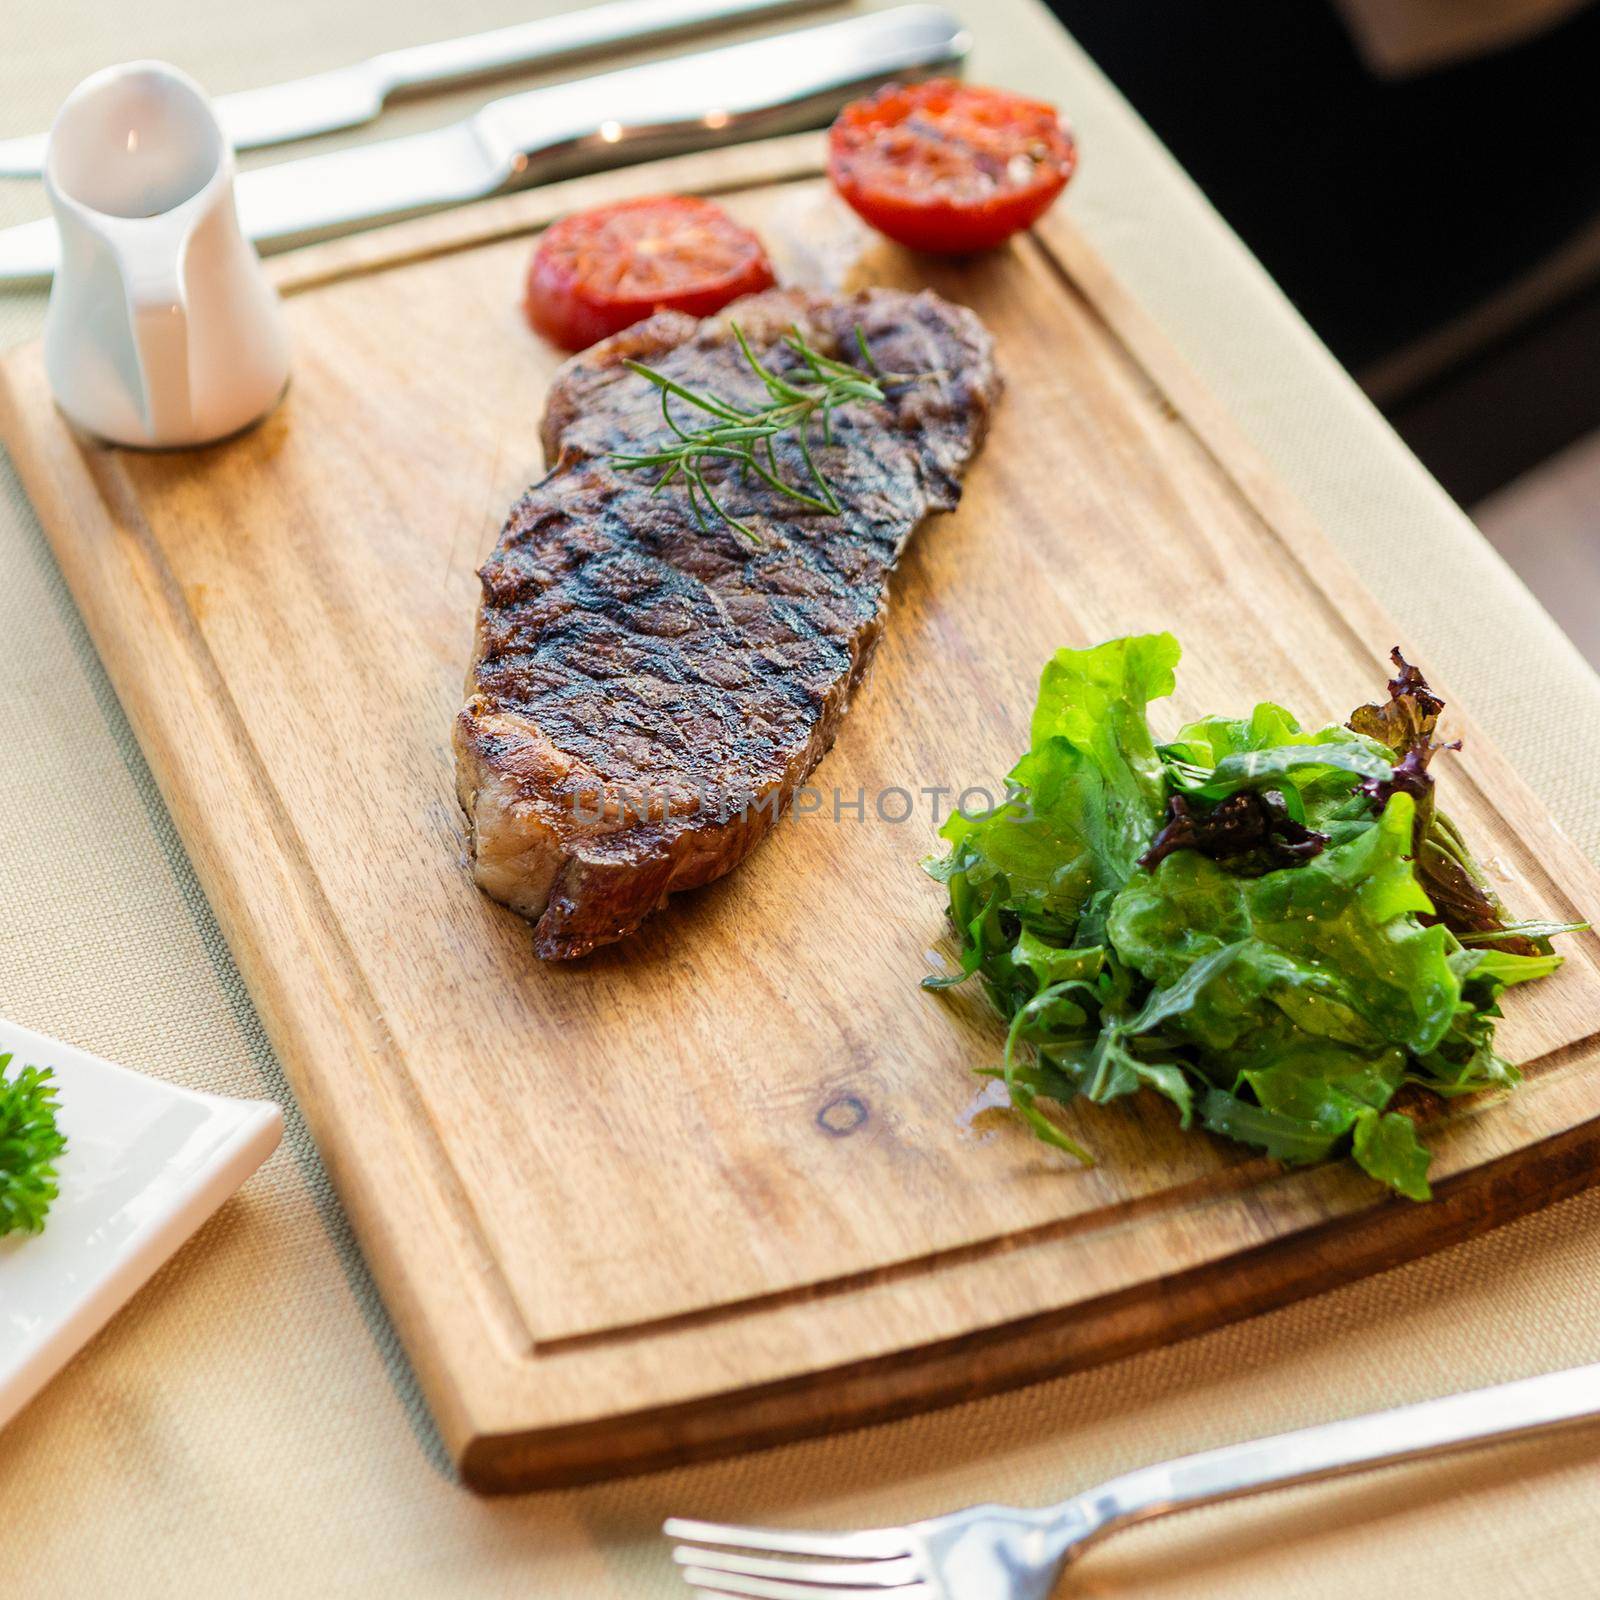 Tasty steak with vegetables on a wooden plate by ferhad